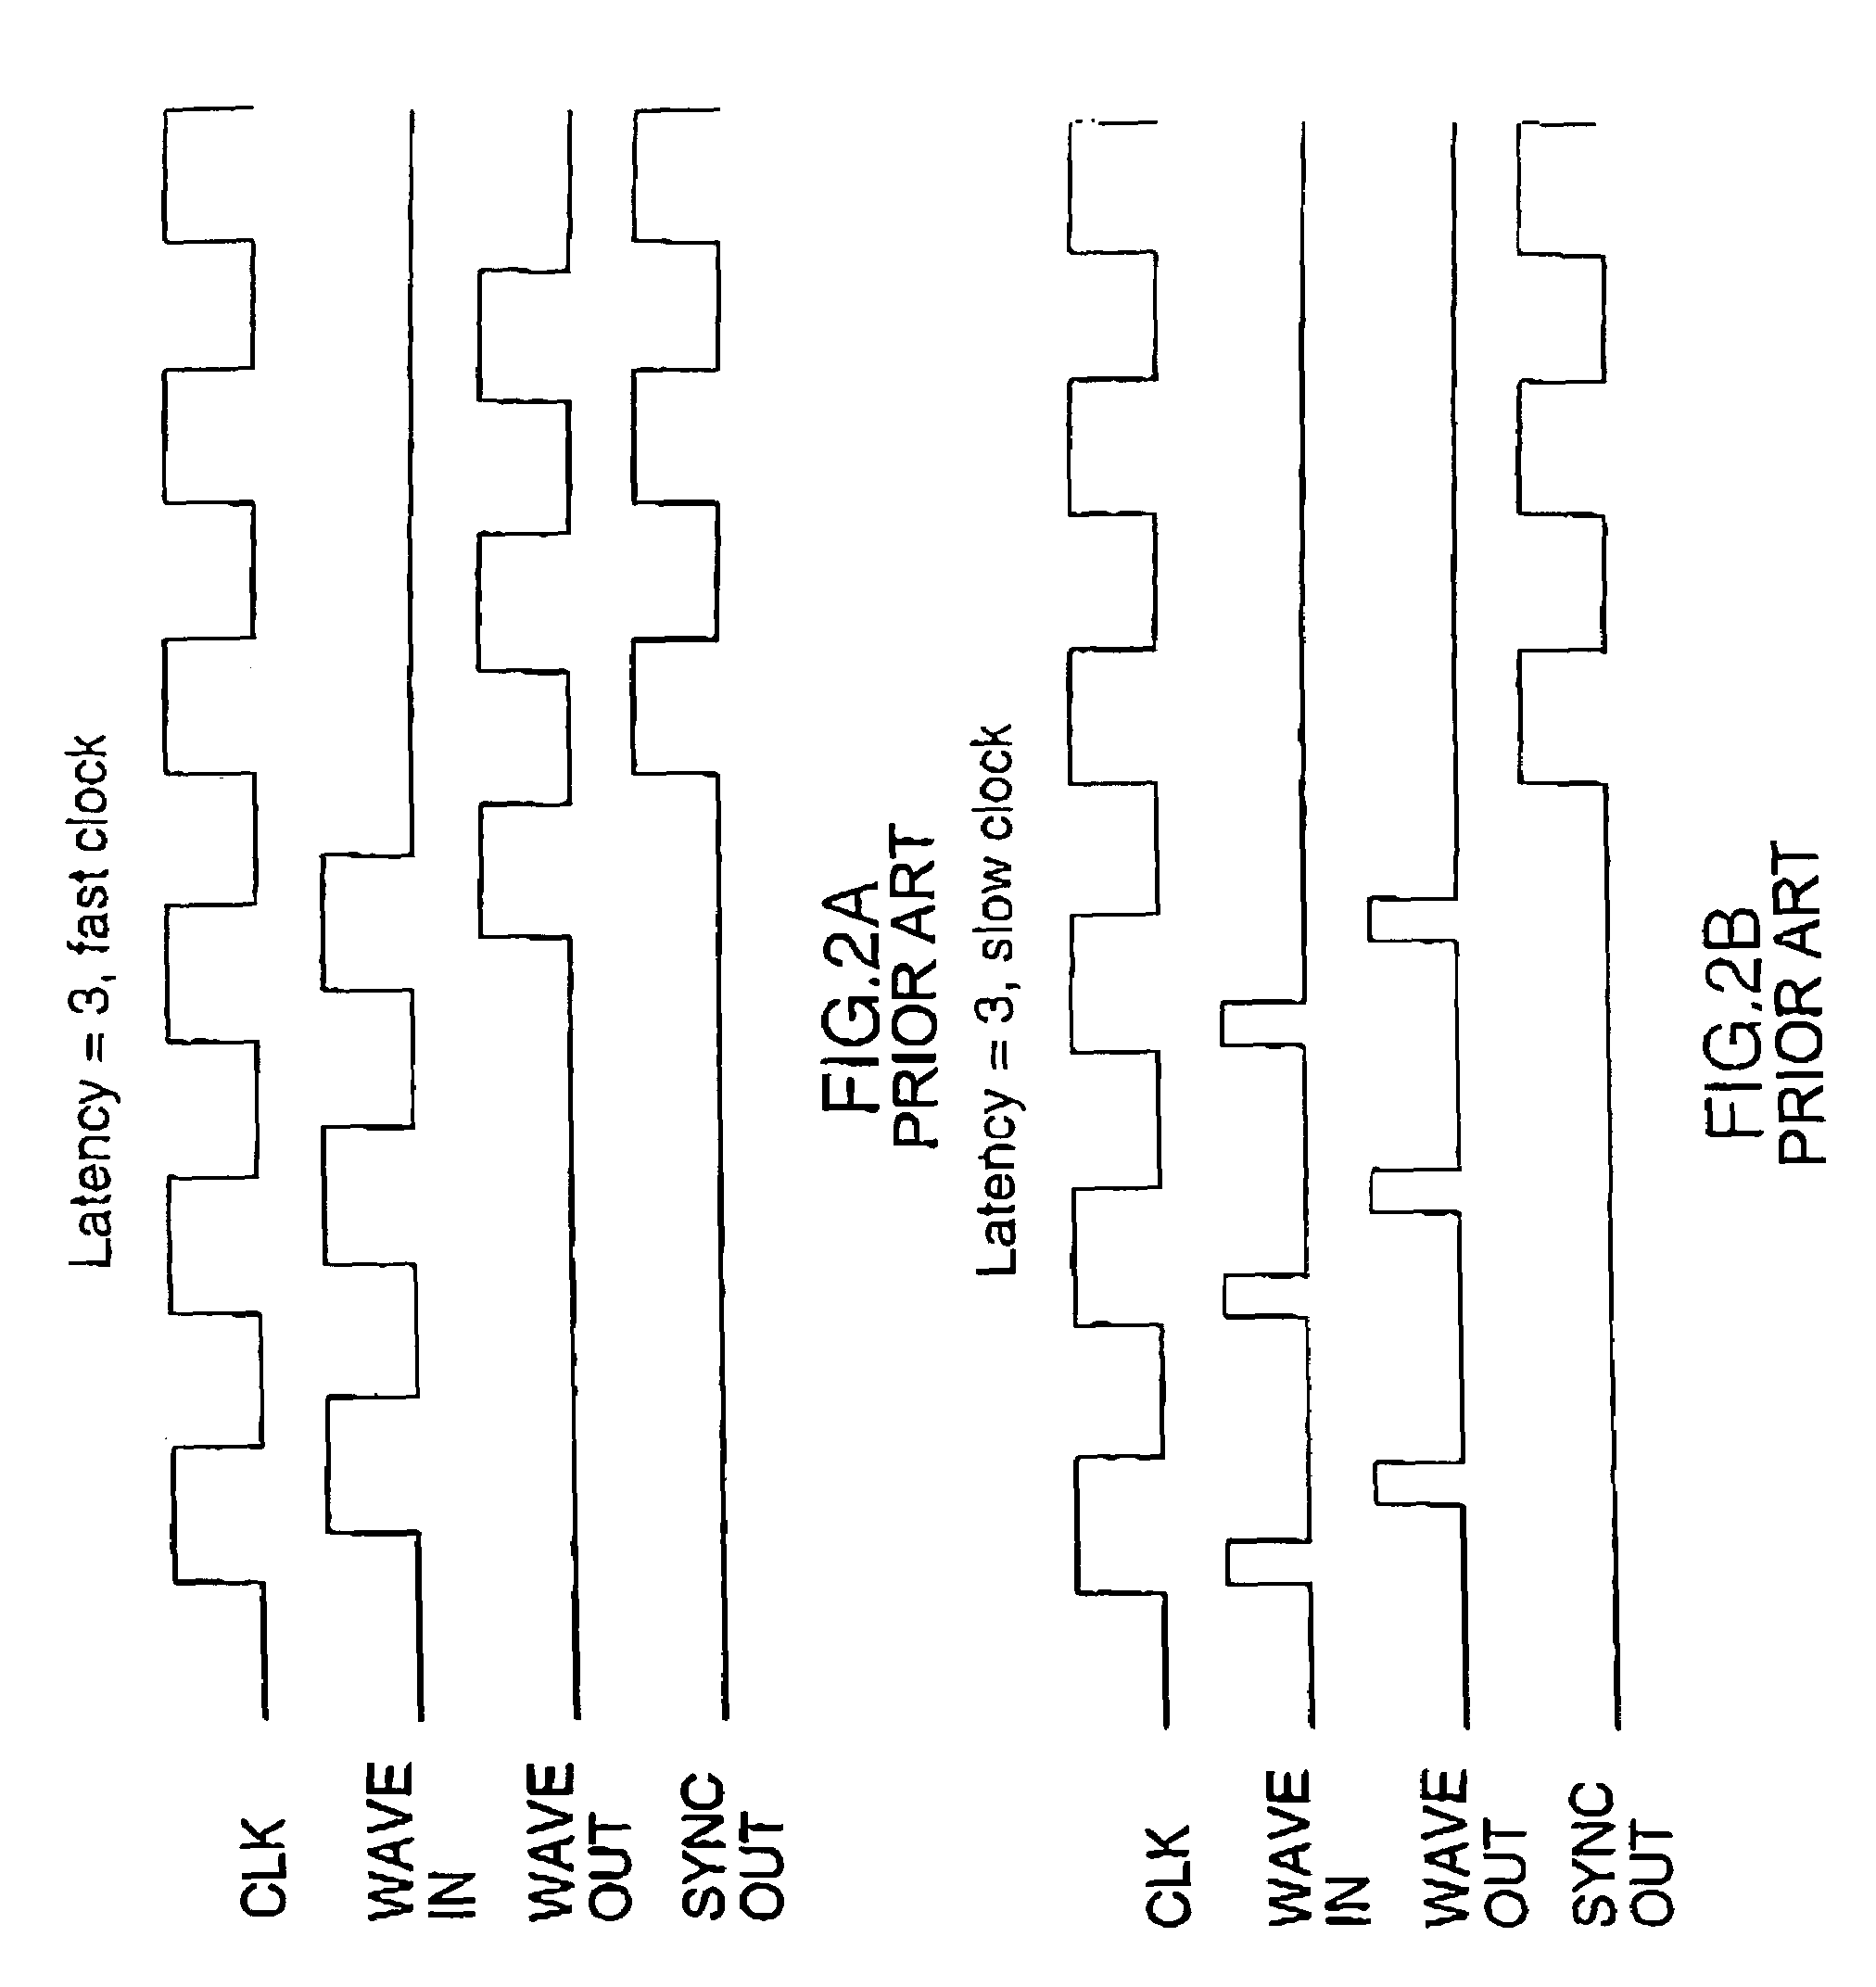 Semiconductor memory asynchronous pipeline